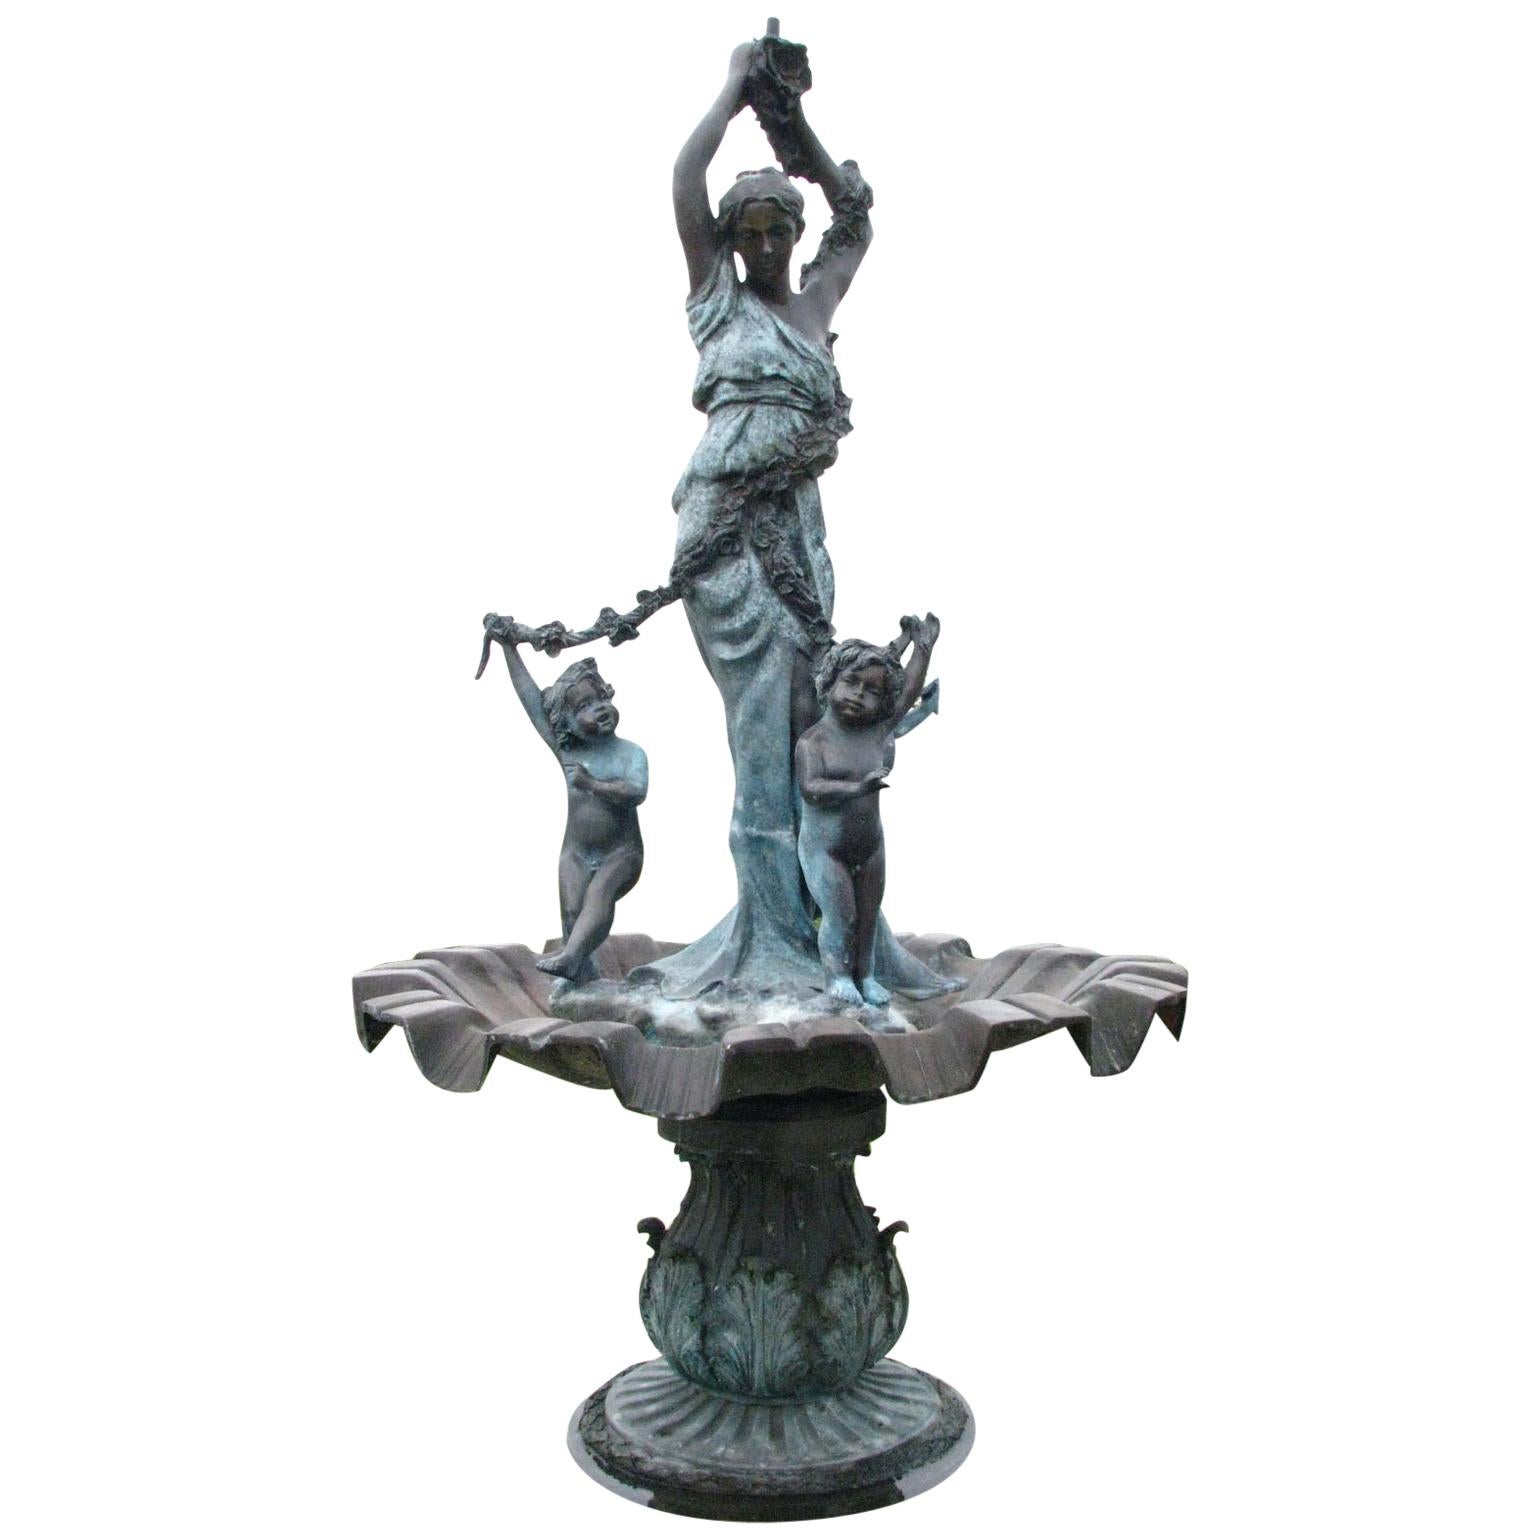 Freestanding Bronze Fountain with Putti, Beginning of the 20th Century